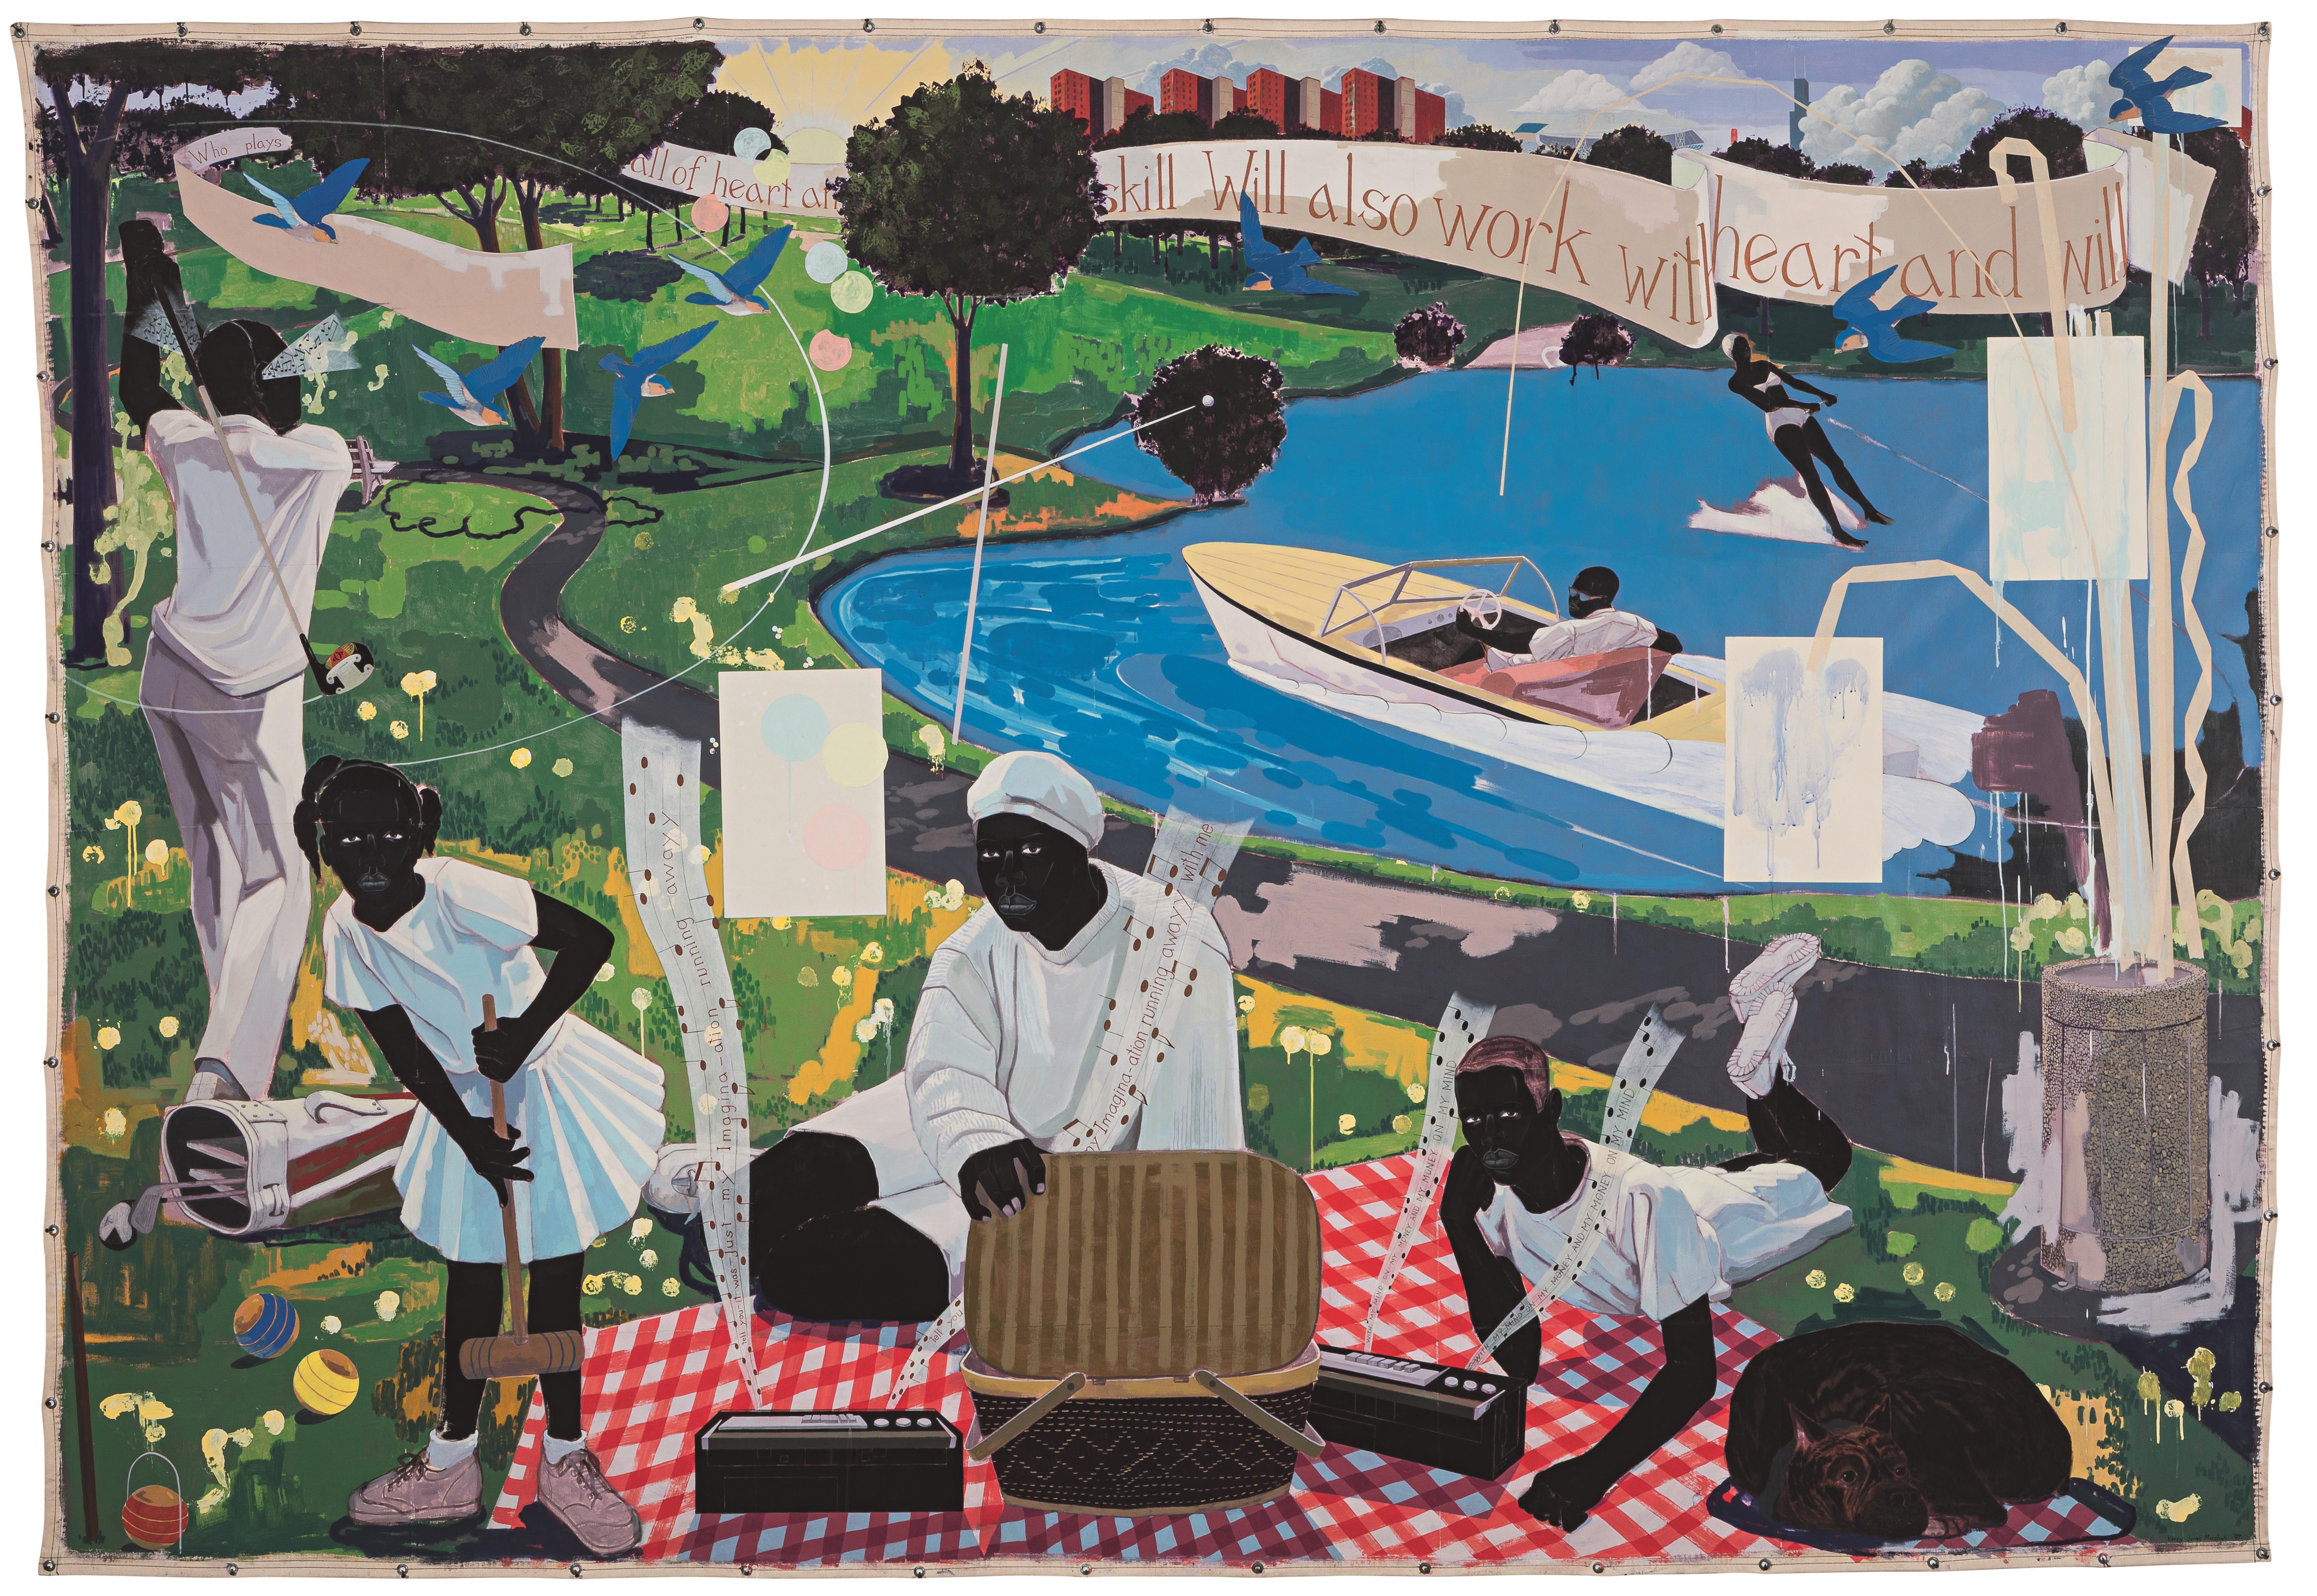 Kerry James Marshall, Sotheby's